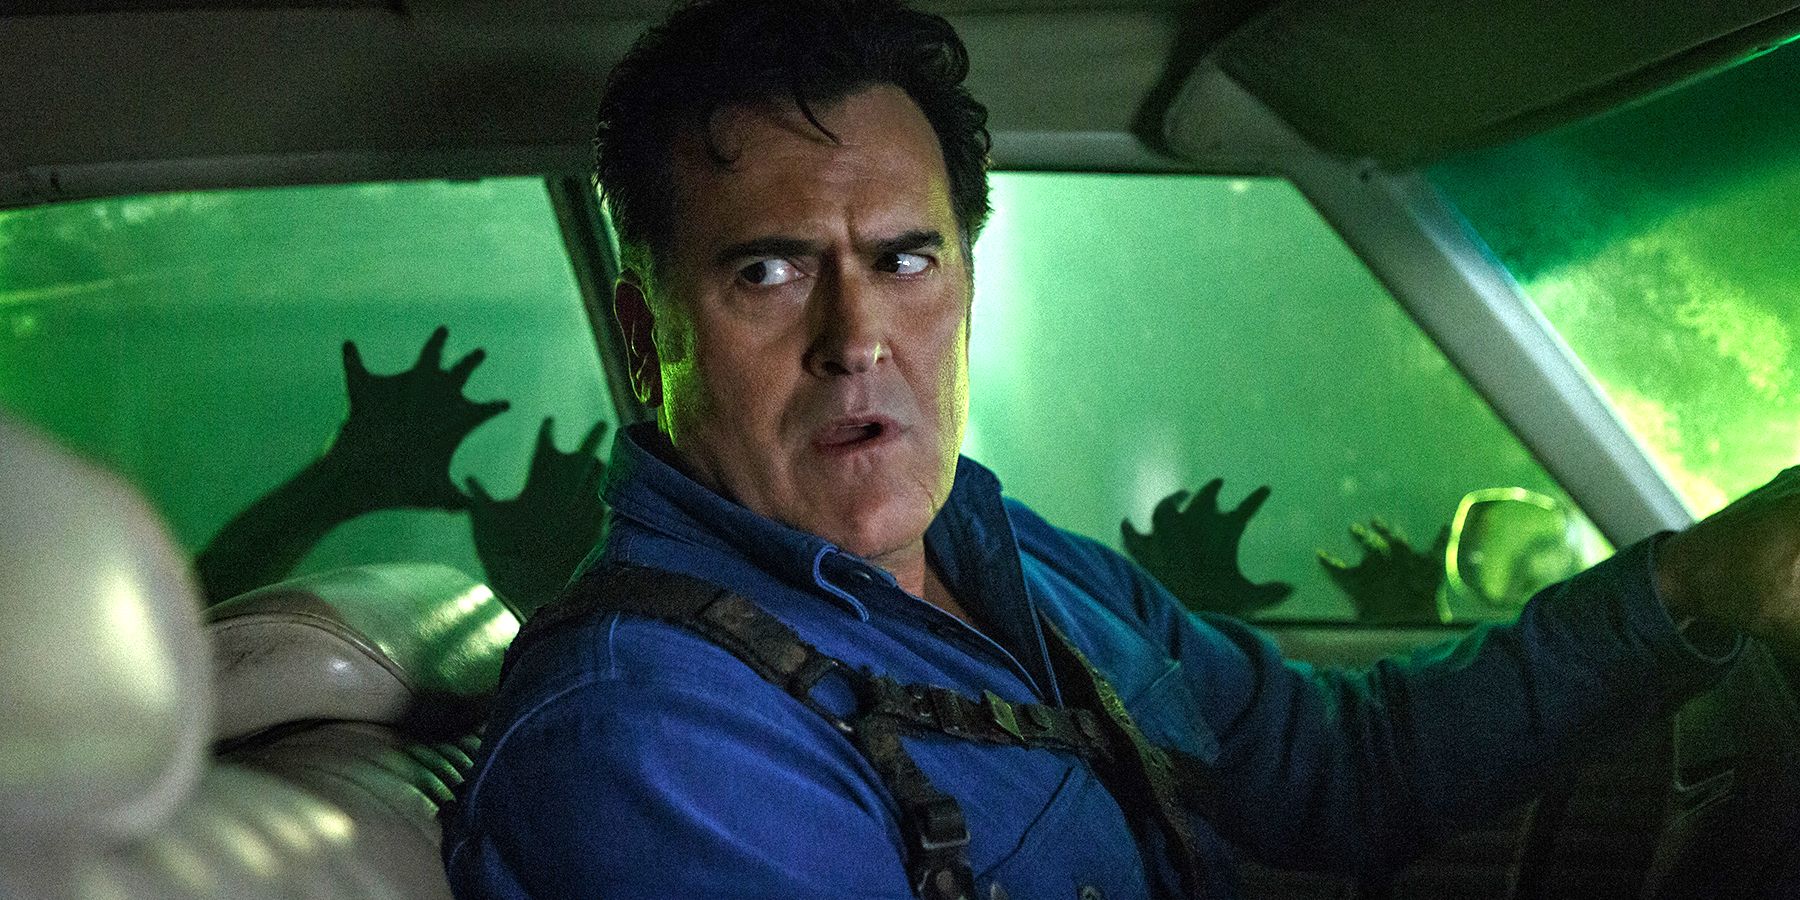 Bruce Campbell trapped in a car and surrounded by Deadites in Ash vs. Evil Dead Season 3